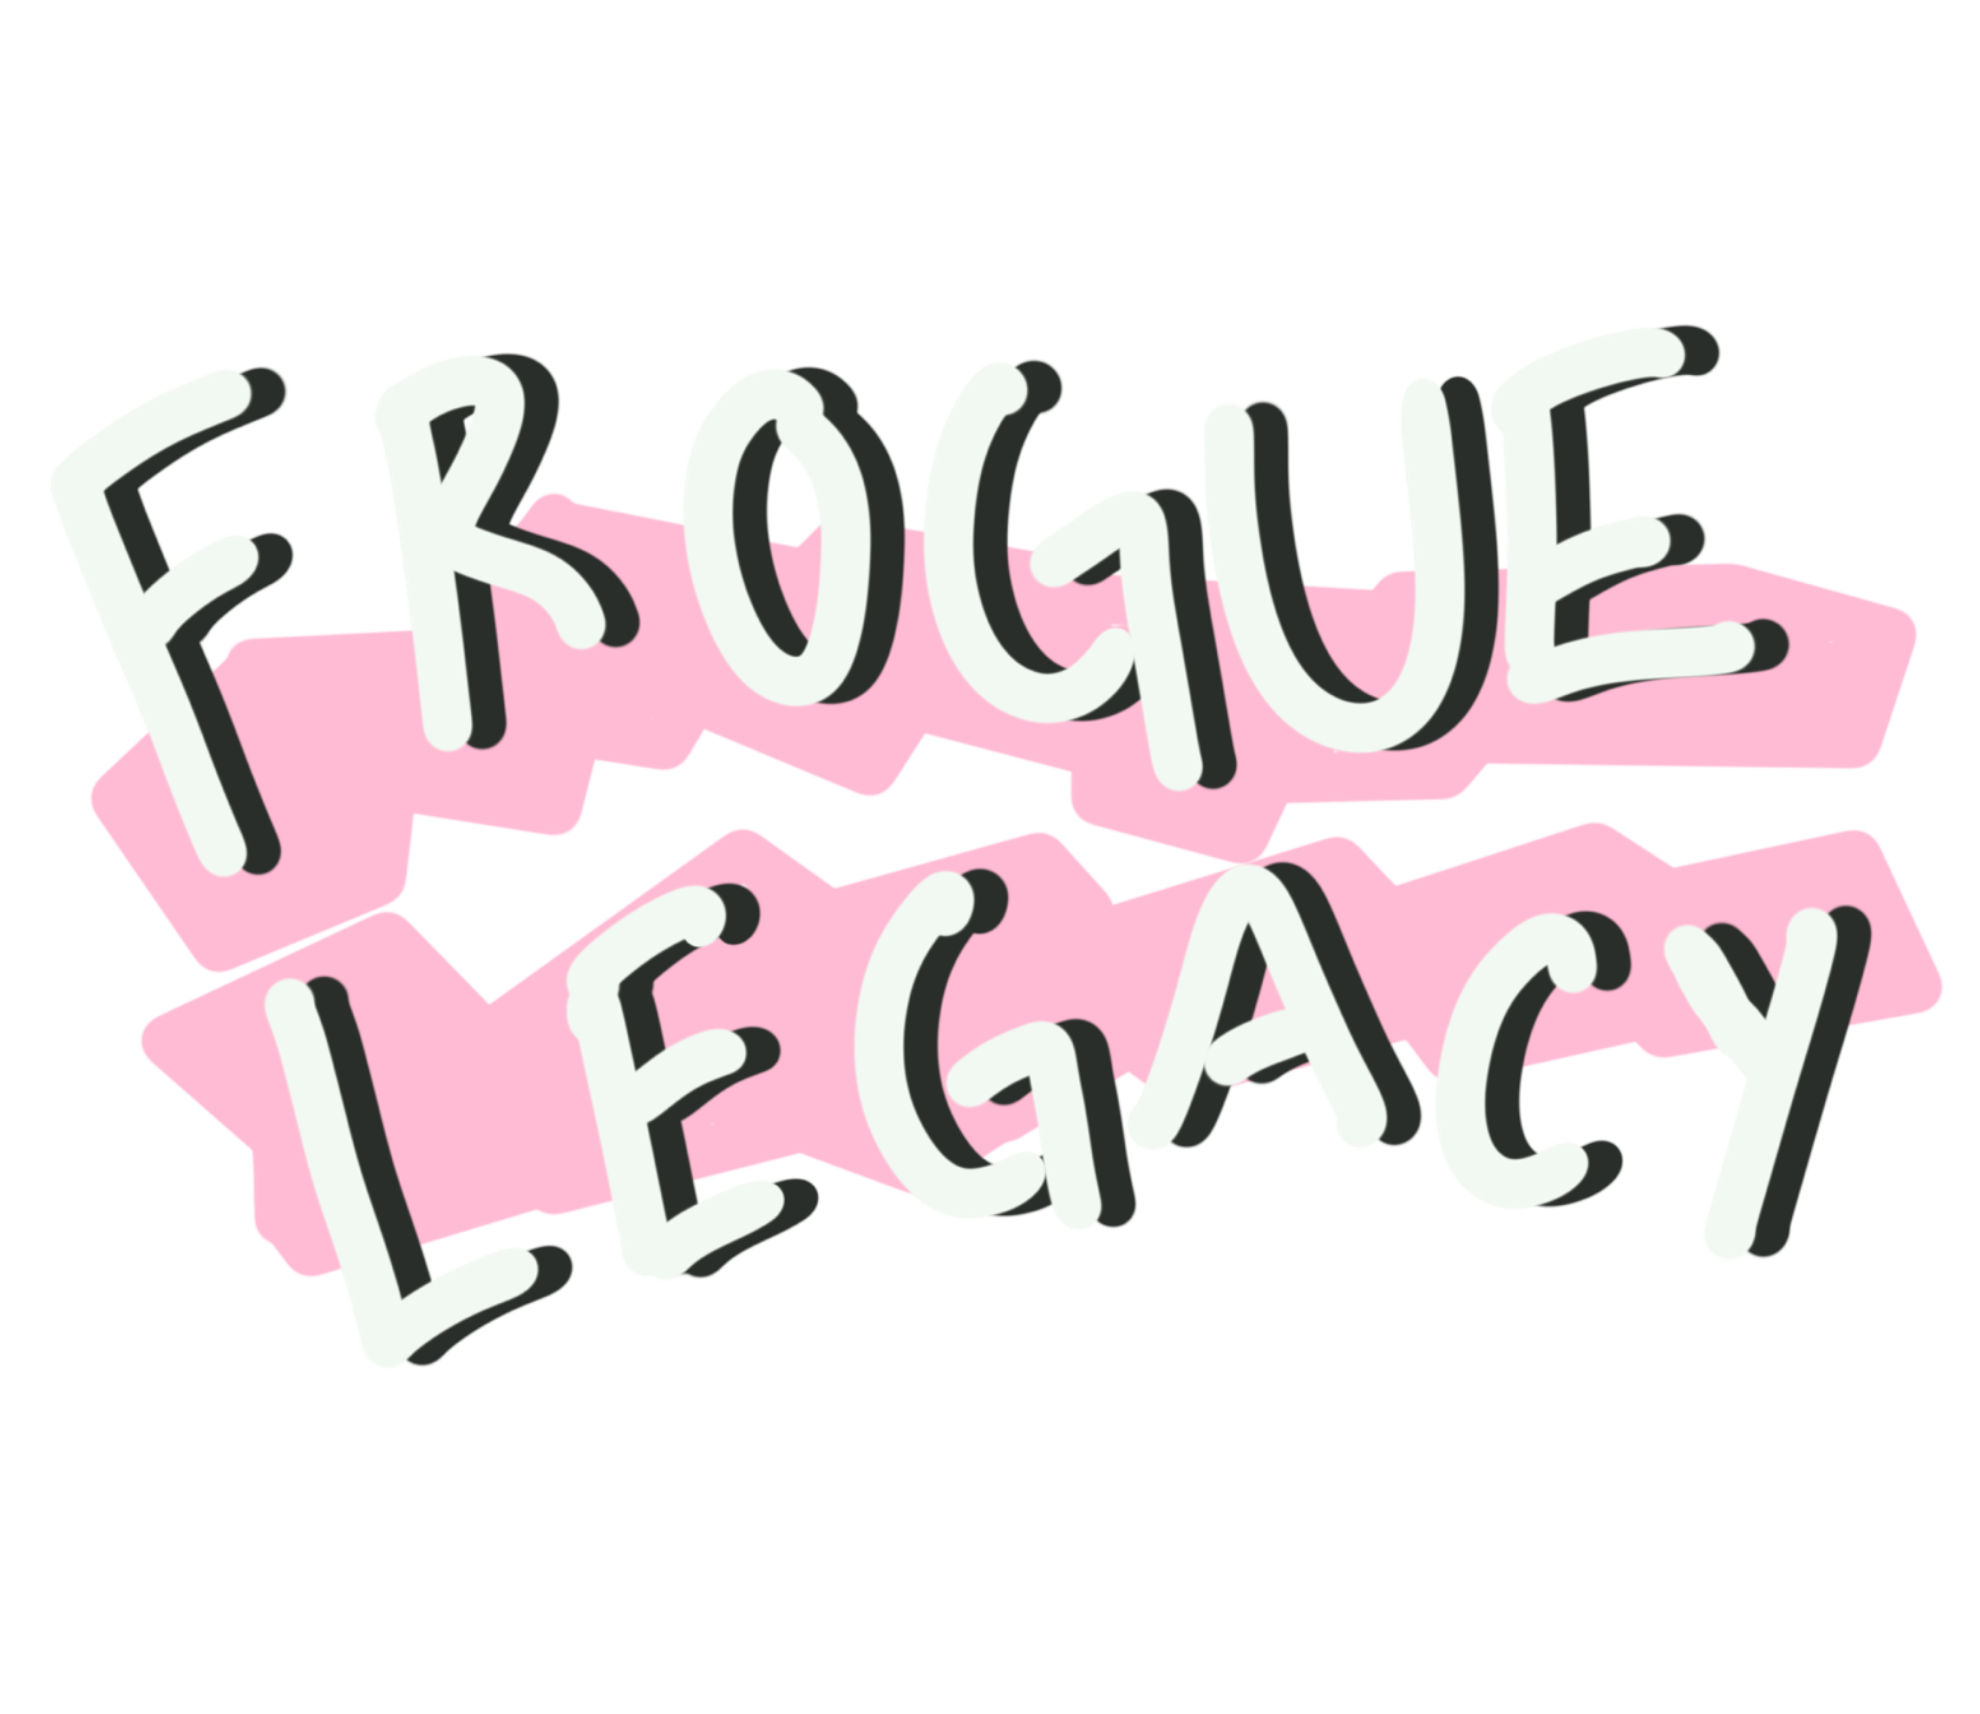 Frogue Legacy